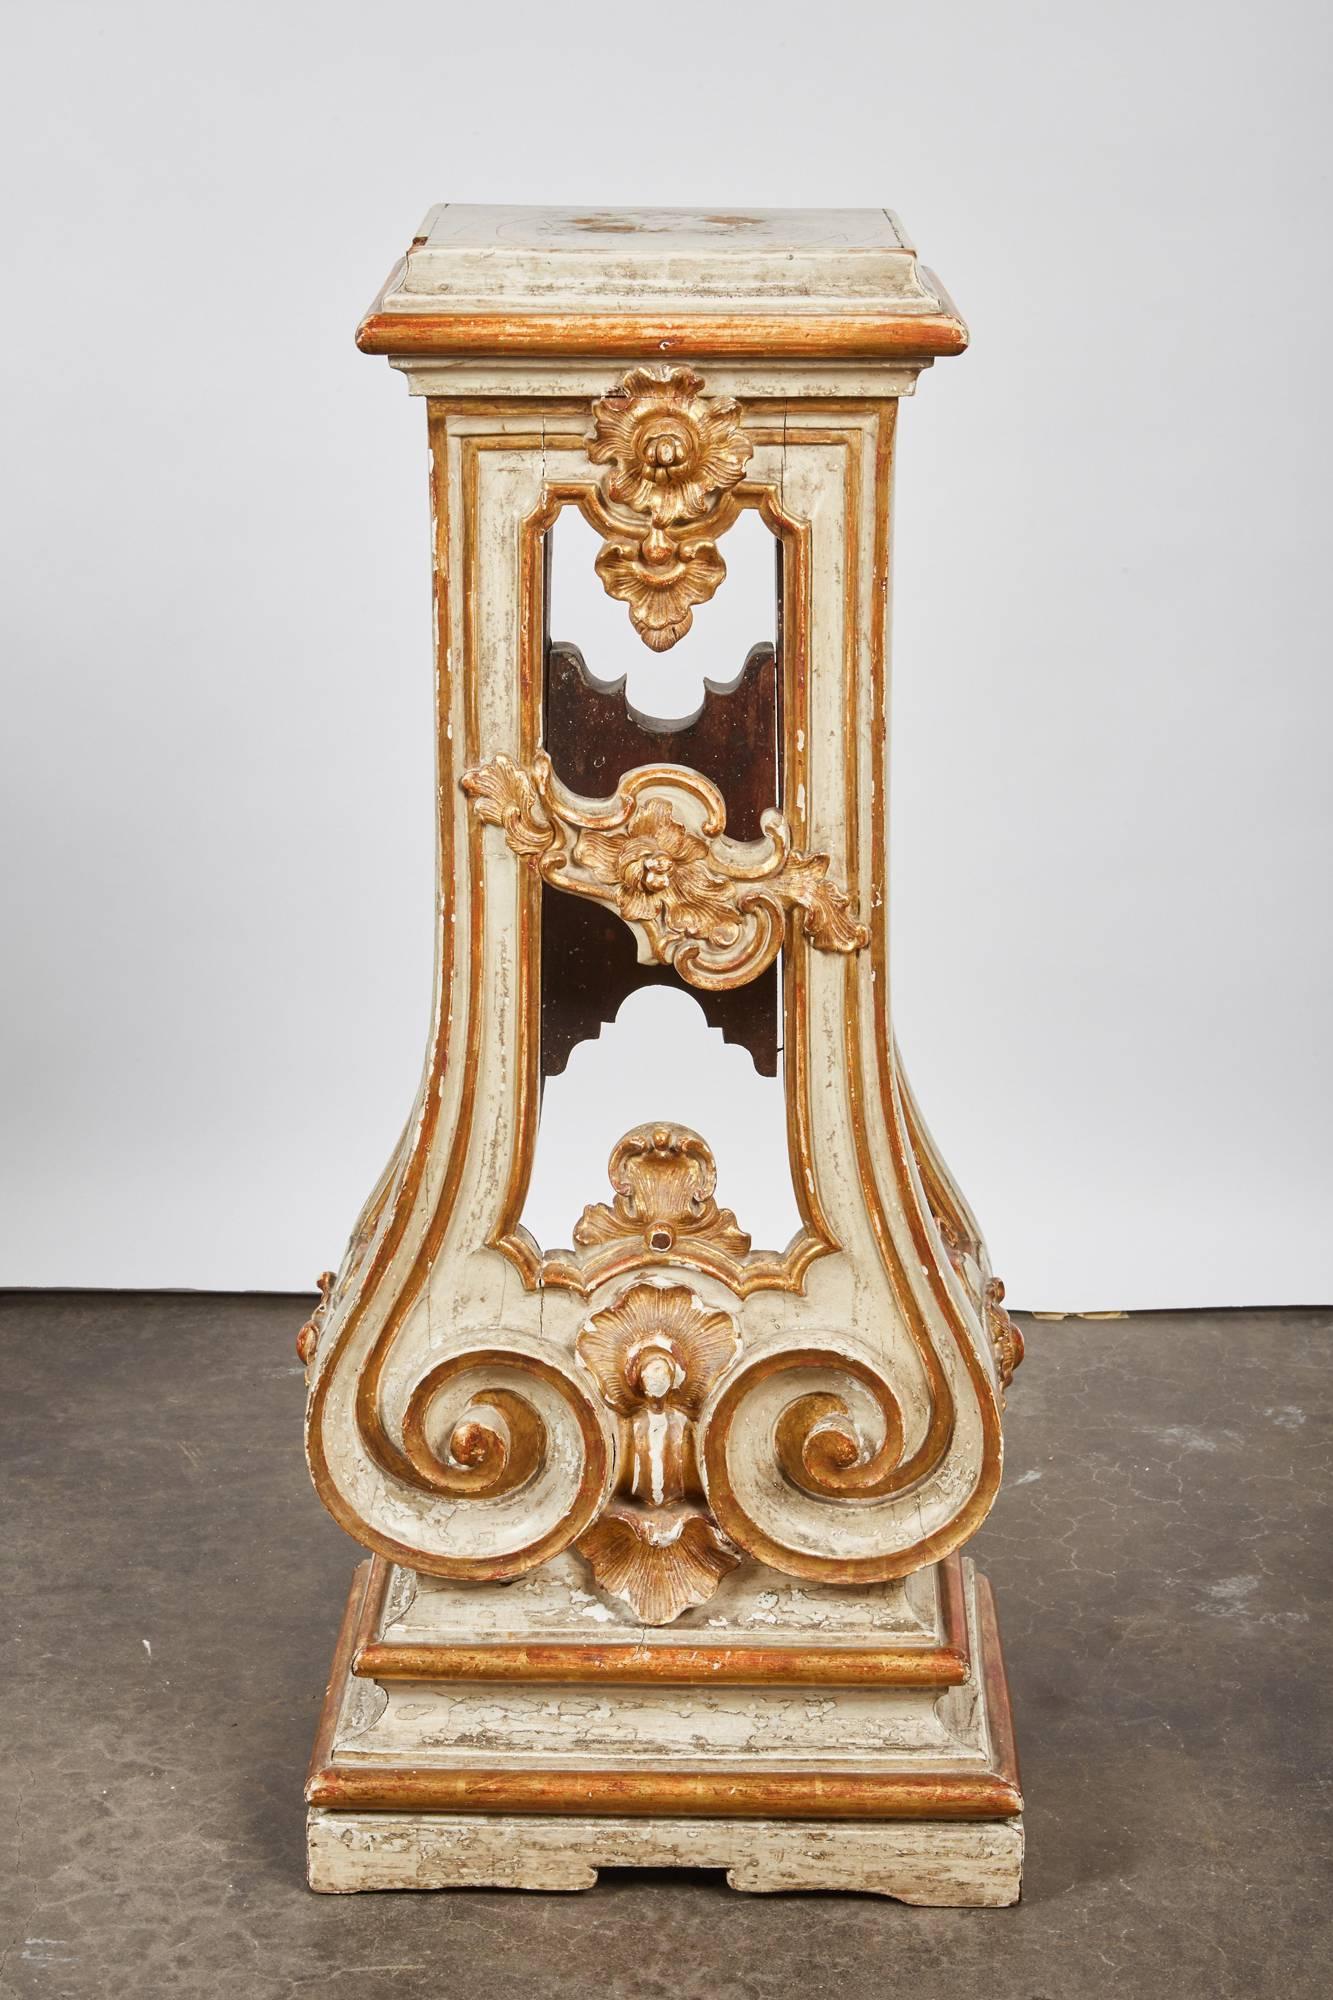 Pair of 18th Century Italian Rococo Cream Painted and Parcel Gilt-Pedestal In Good Condition For Sale In Pasadena, CA